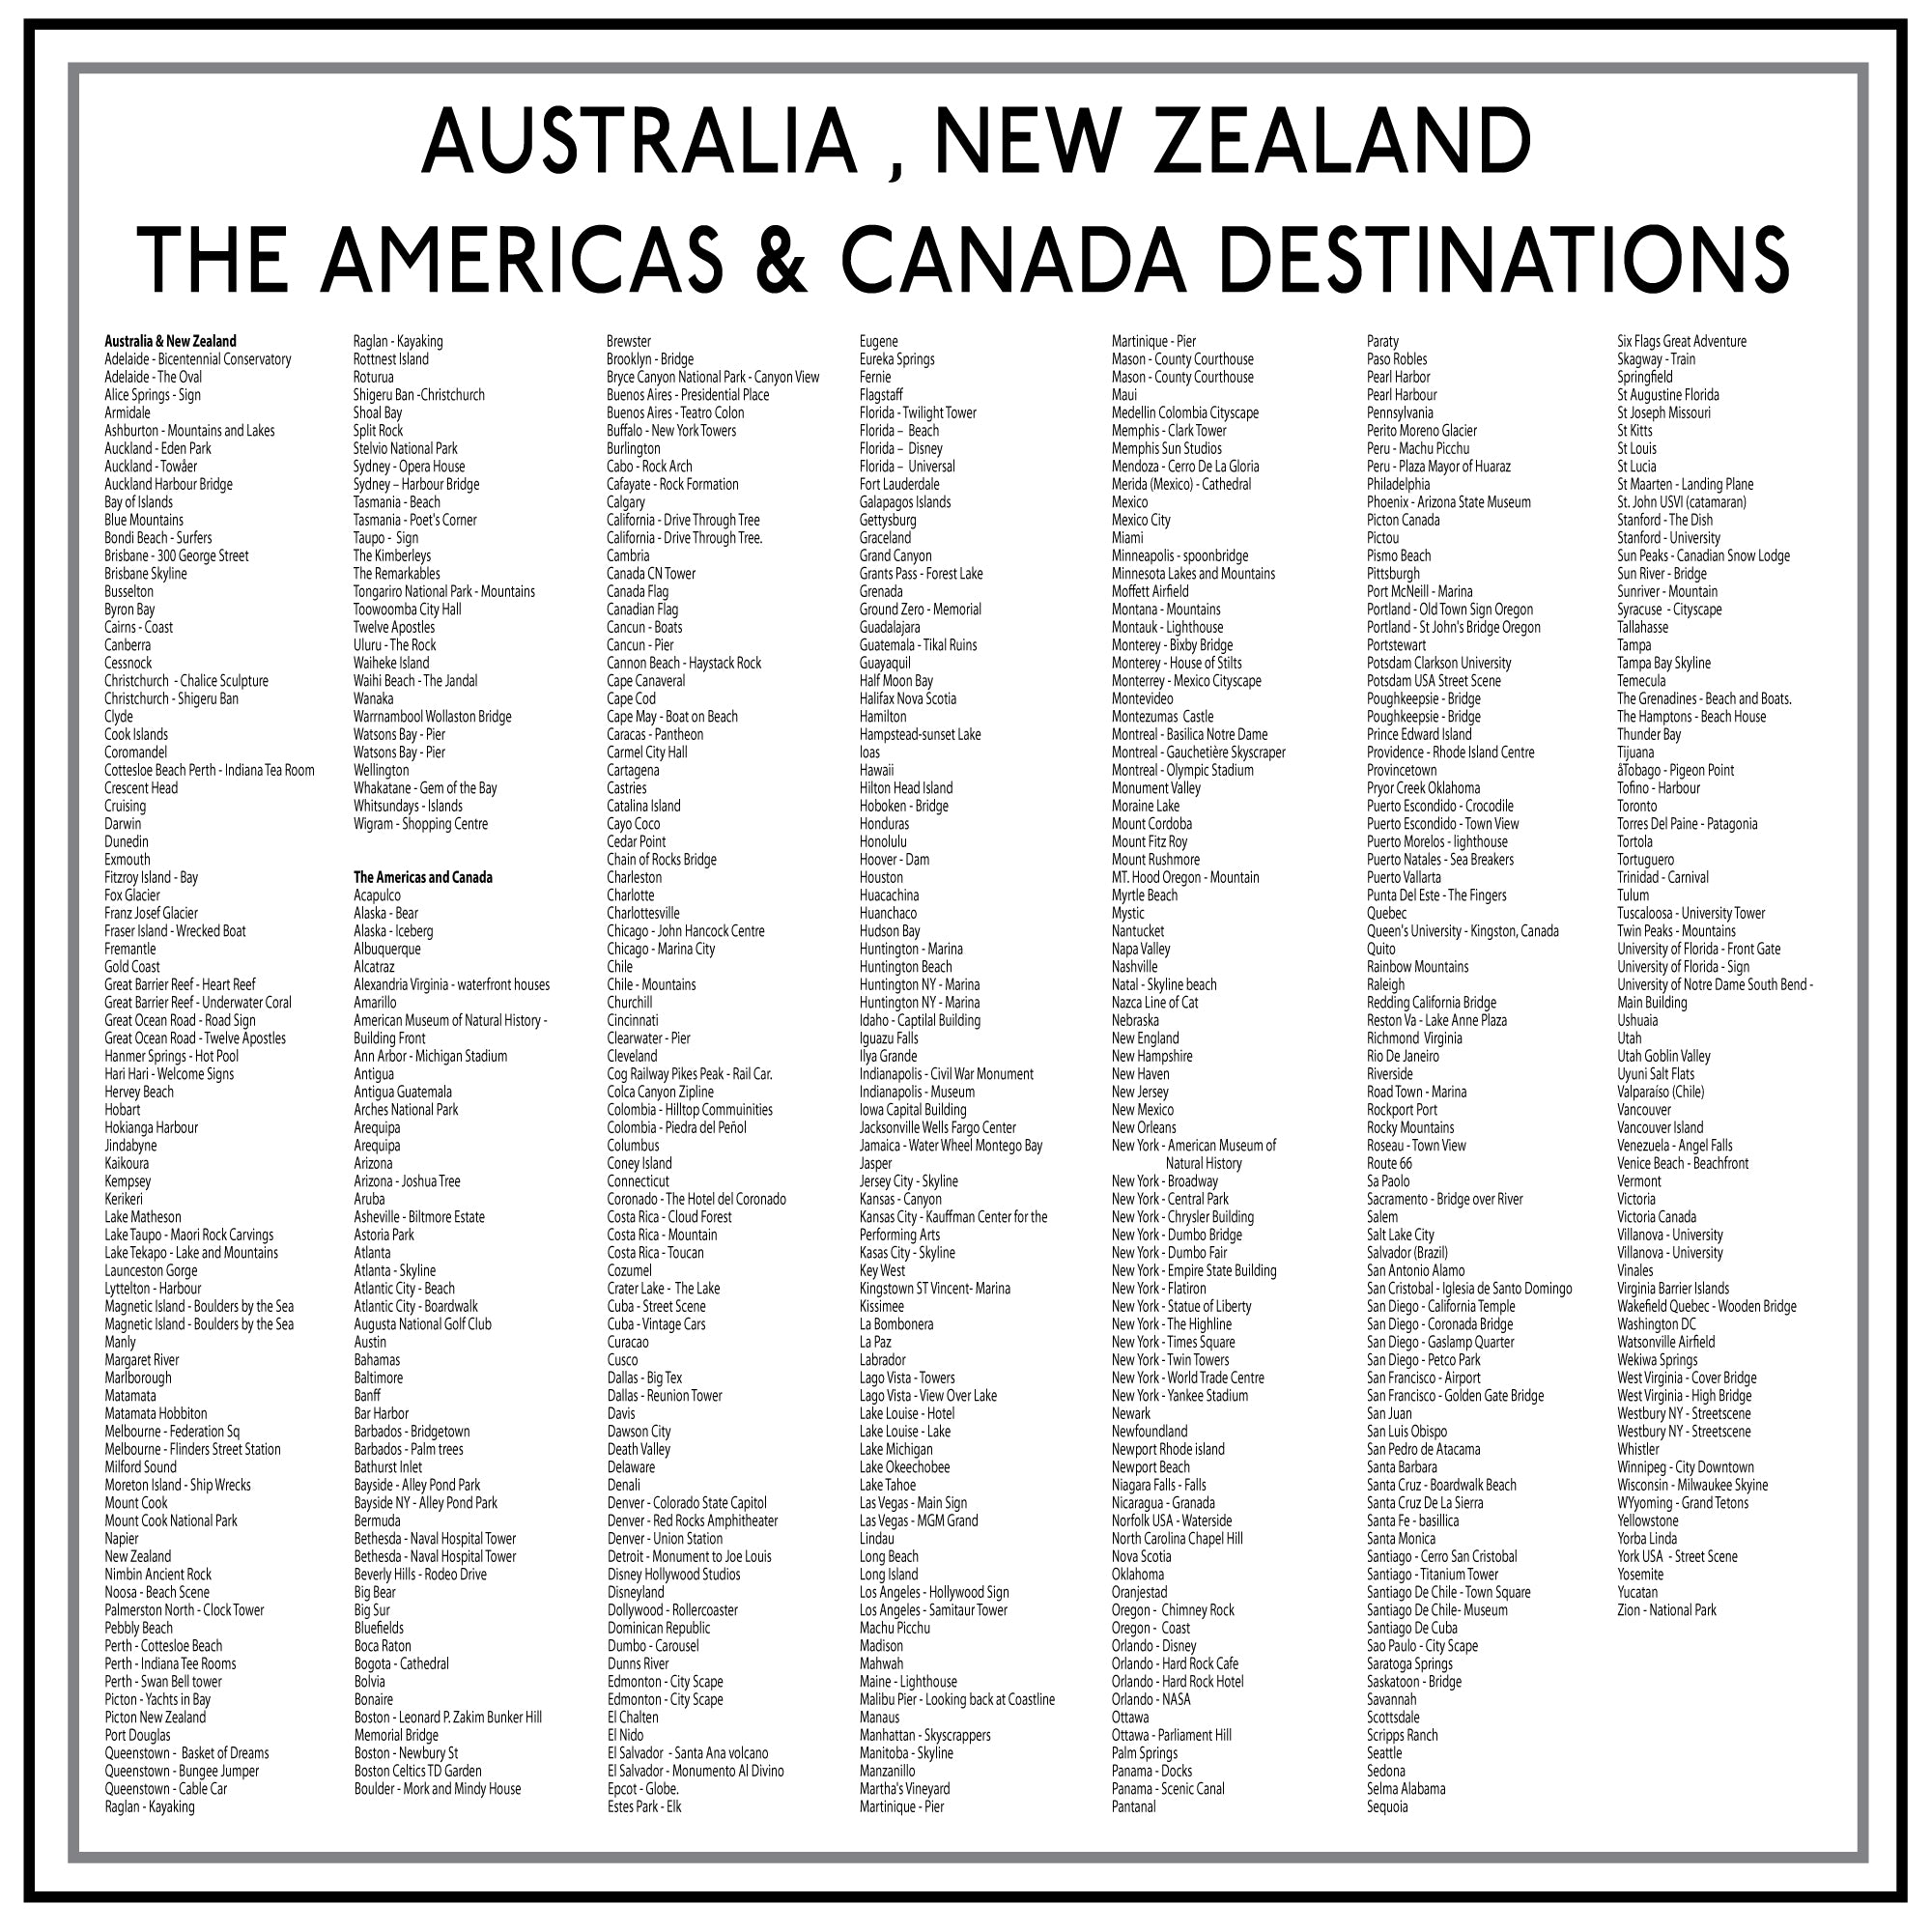 Image showing list of Australia, New Zealand, The Americas & Canada Destinations